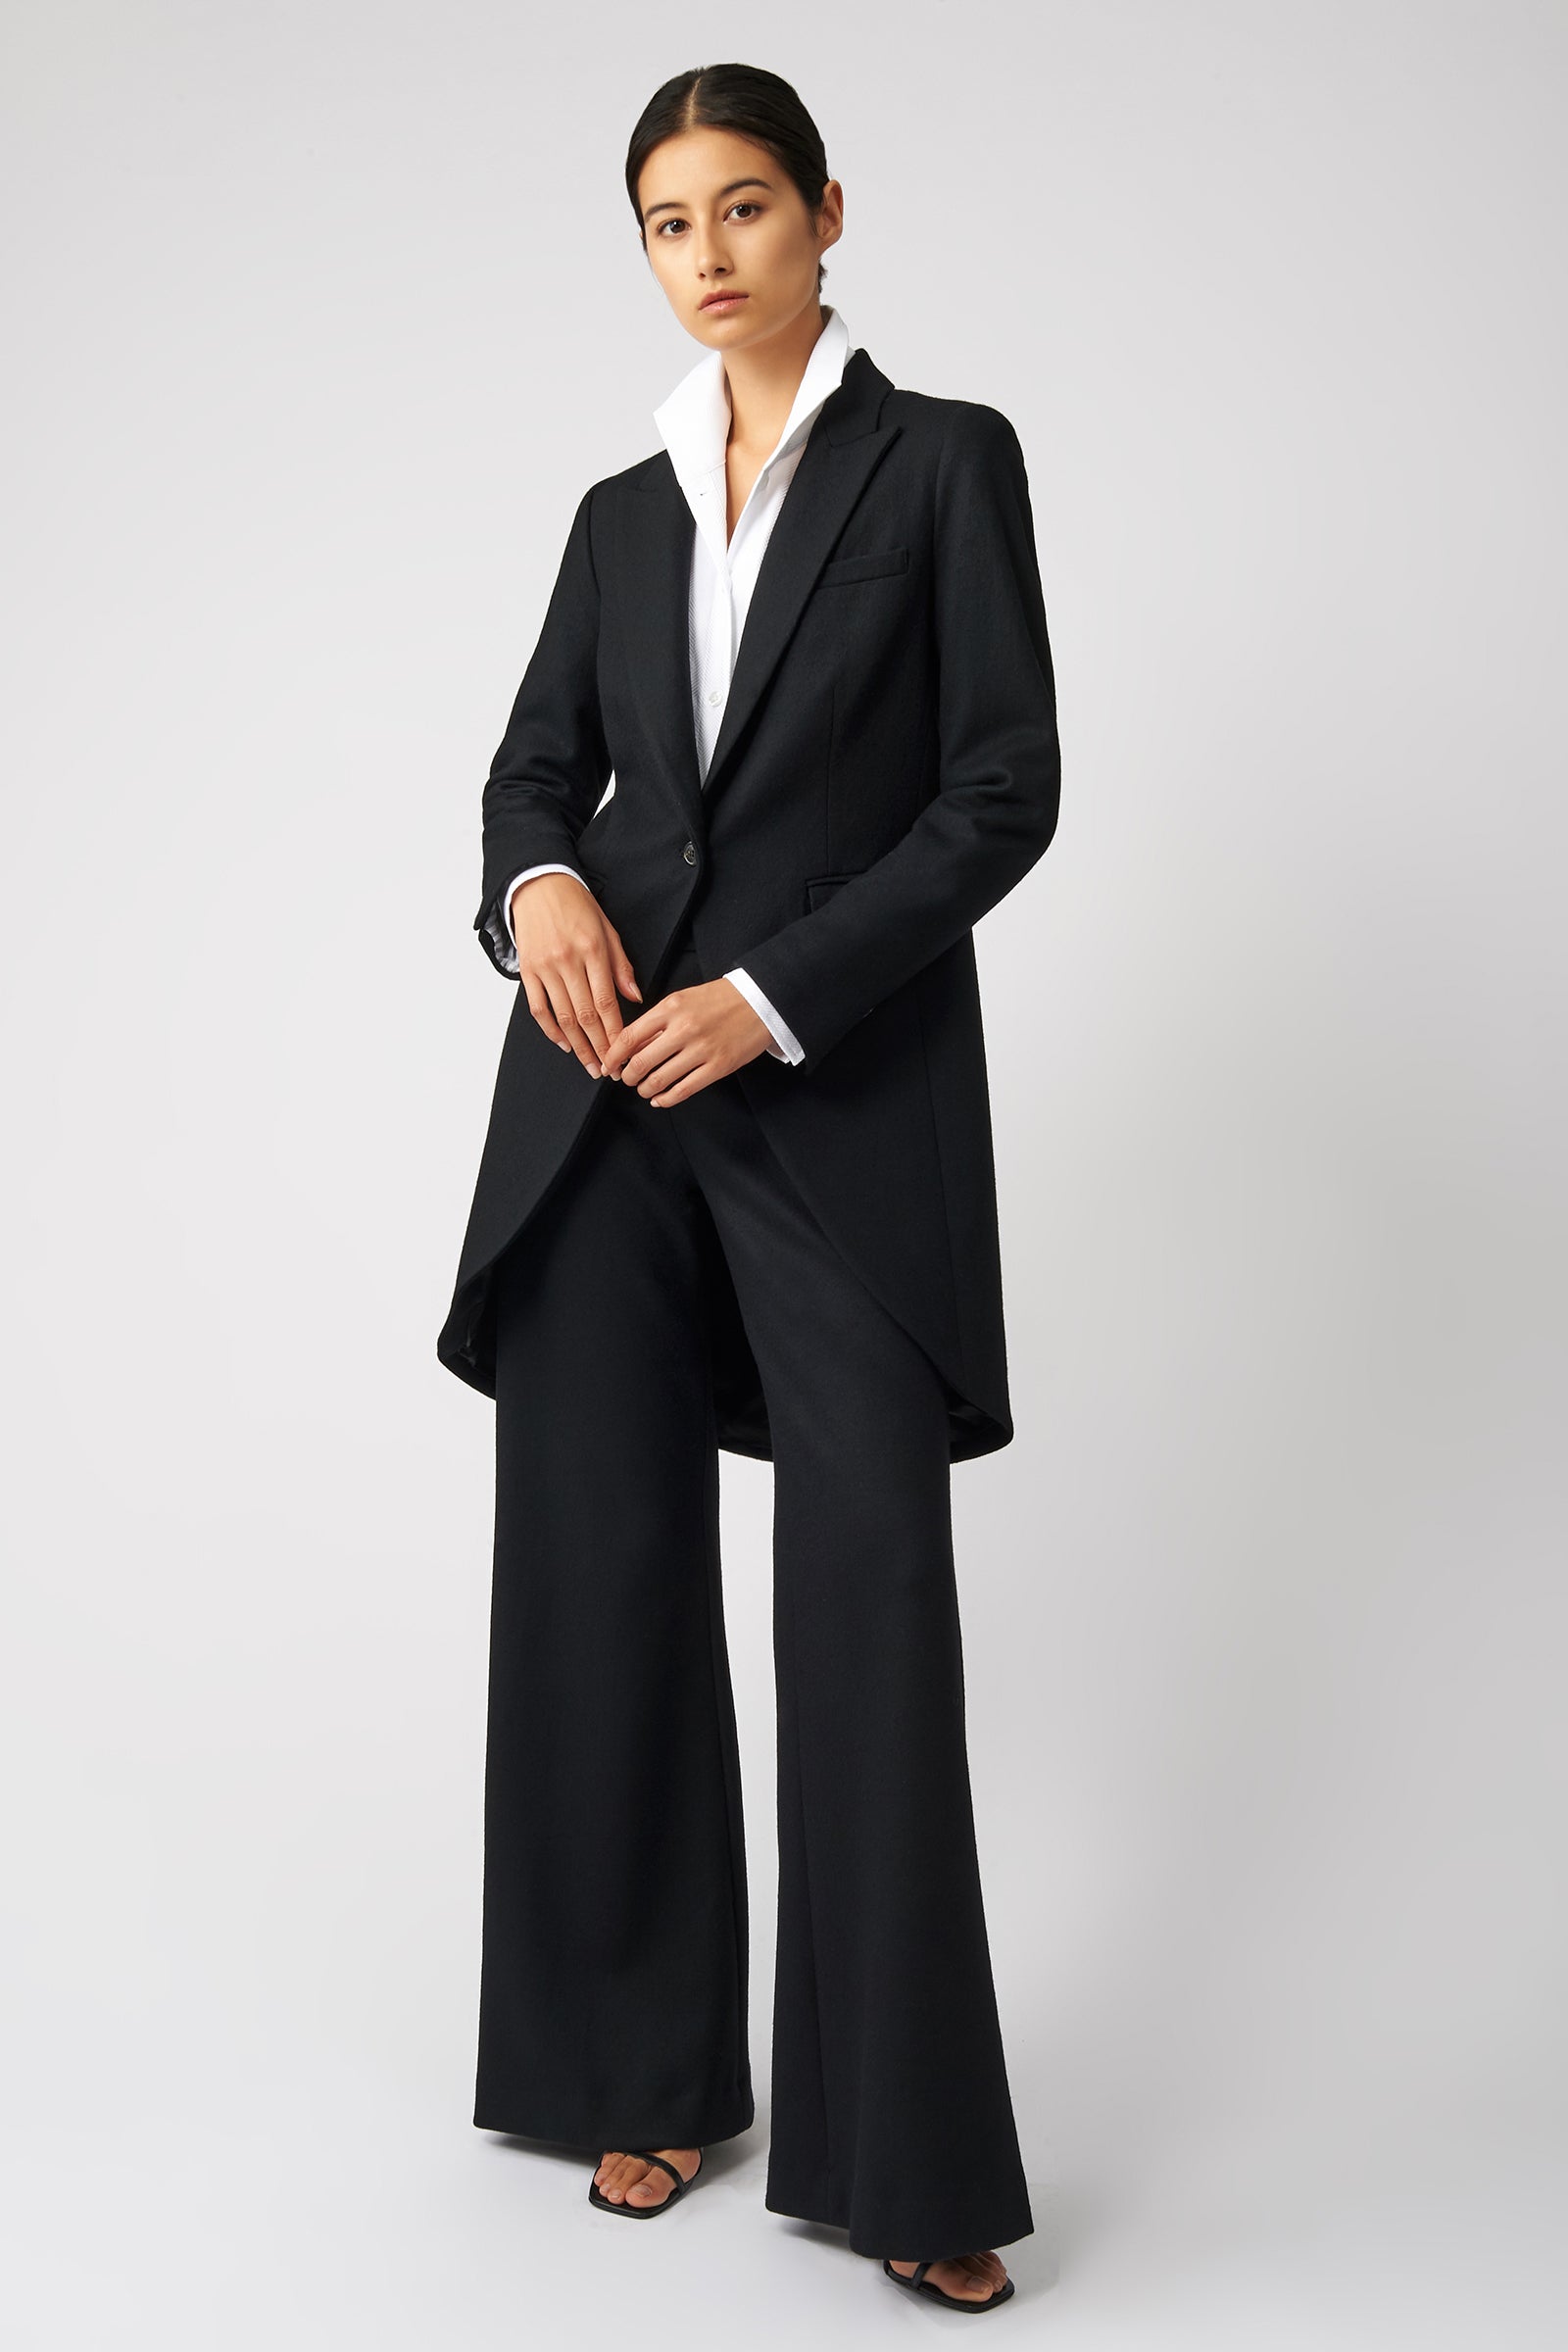 Tailored Tux Blazer in Black Made From 100% Japanese Wool – KAL RIEMAN